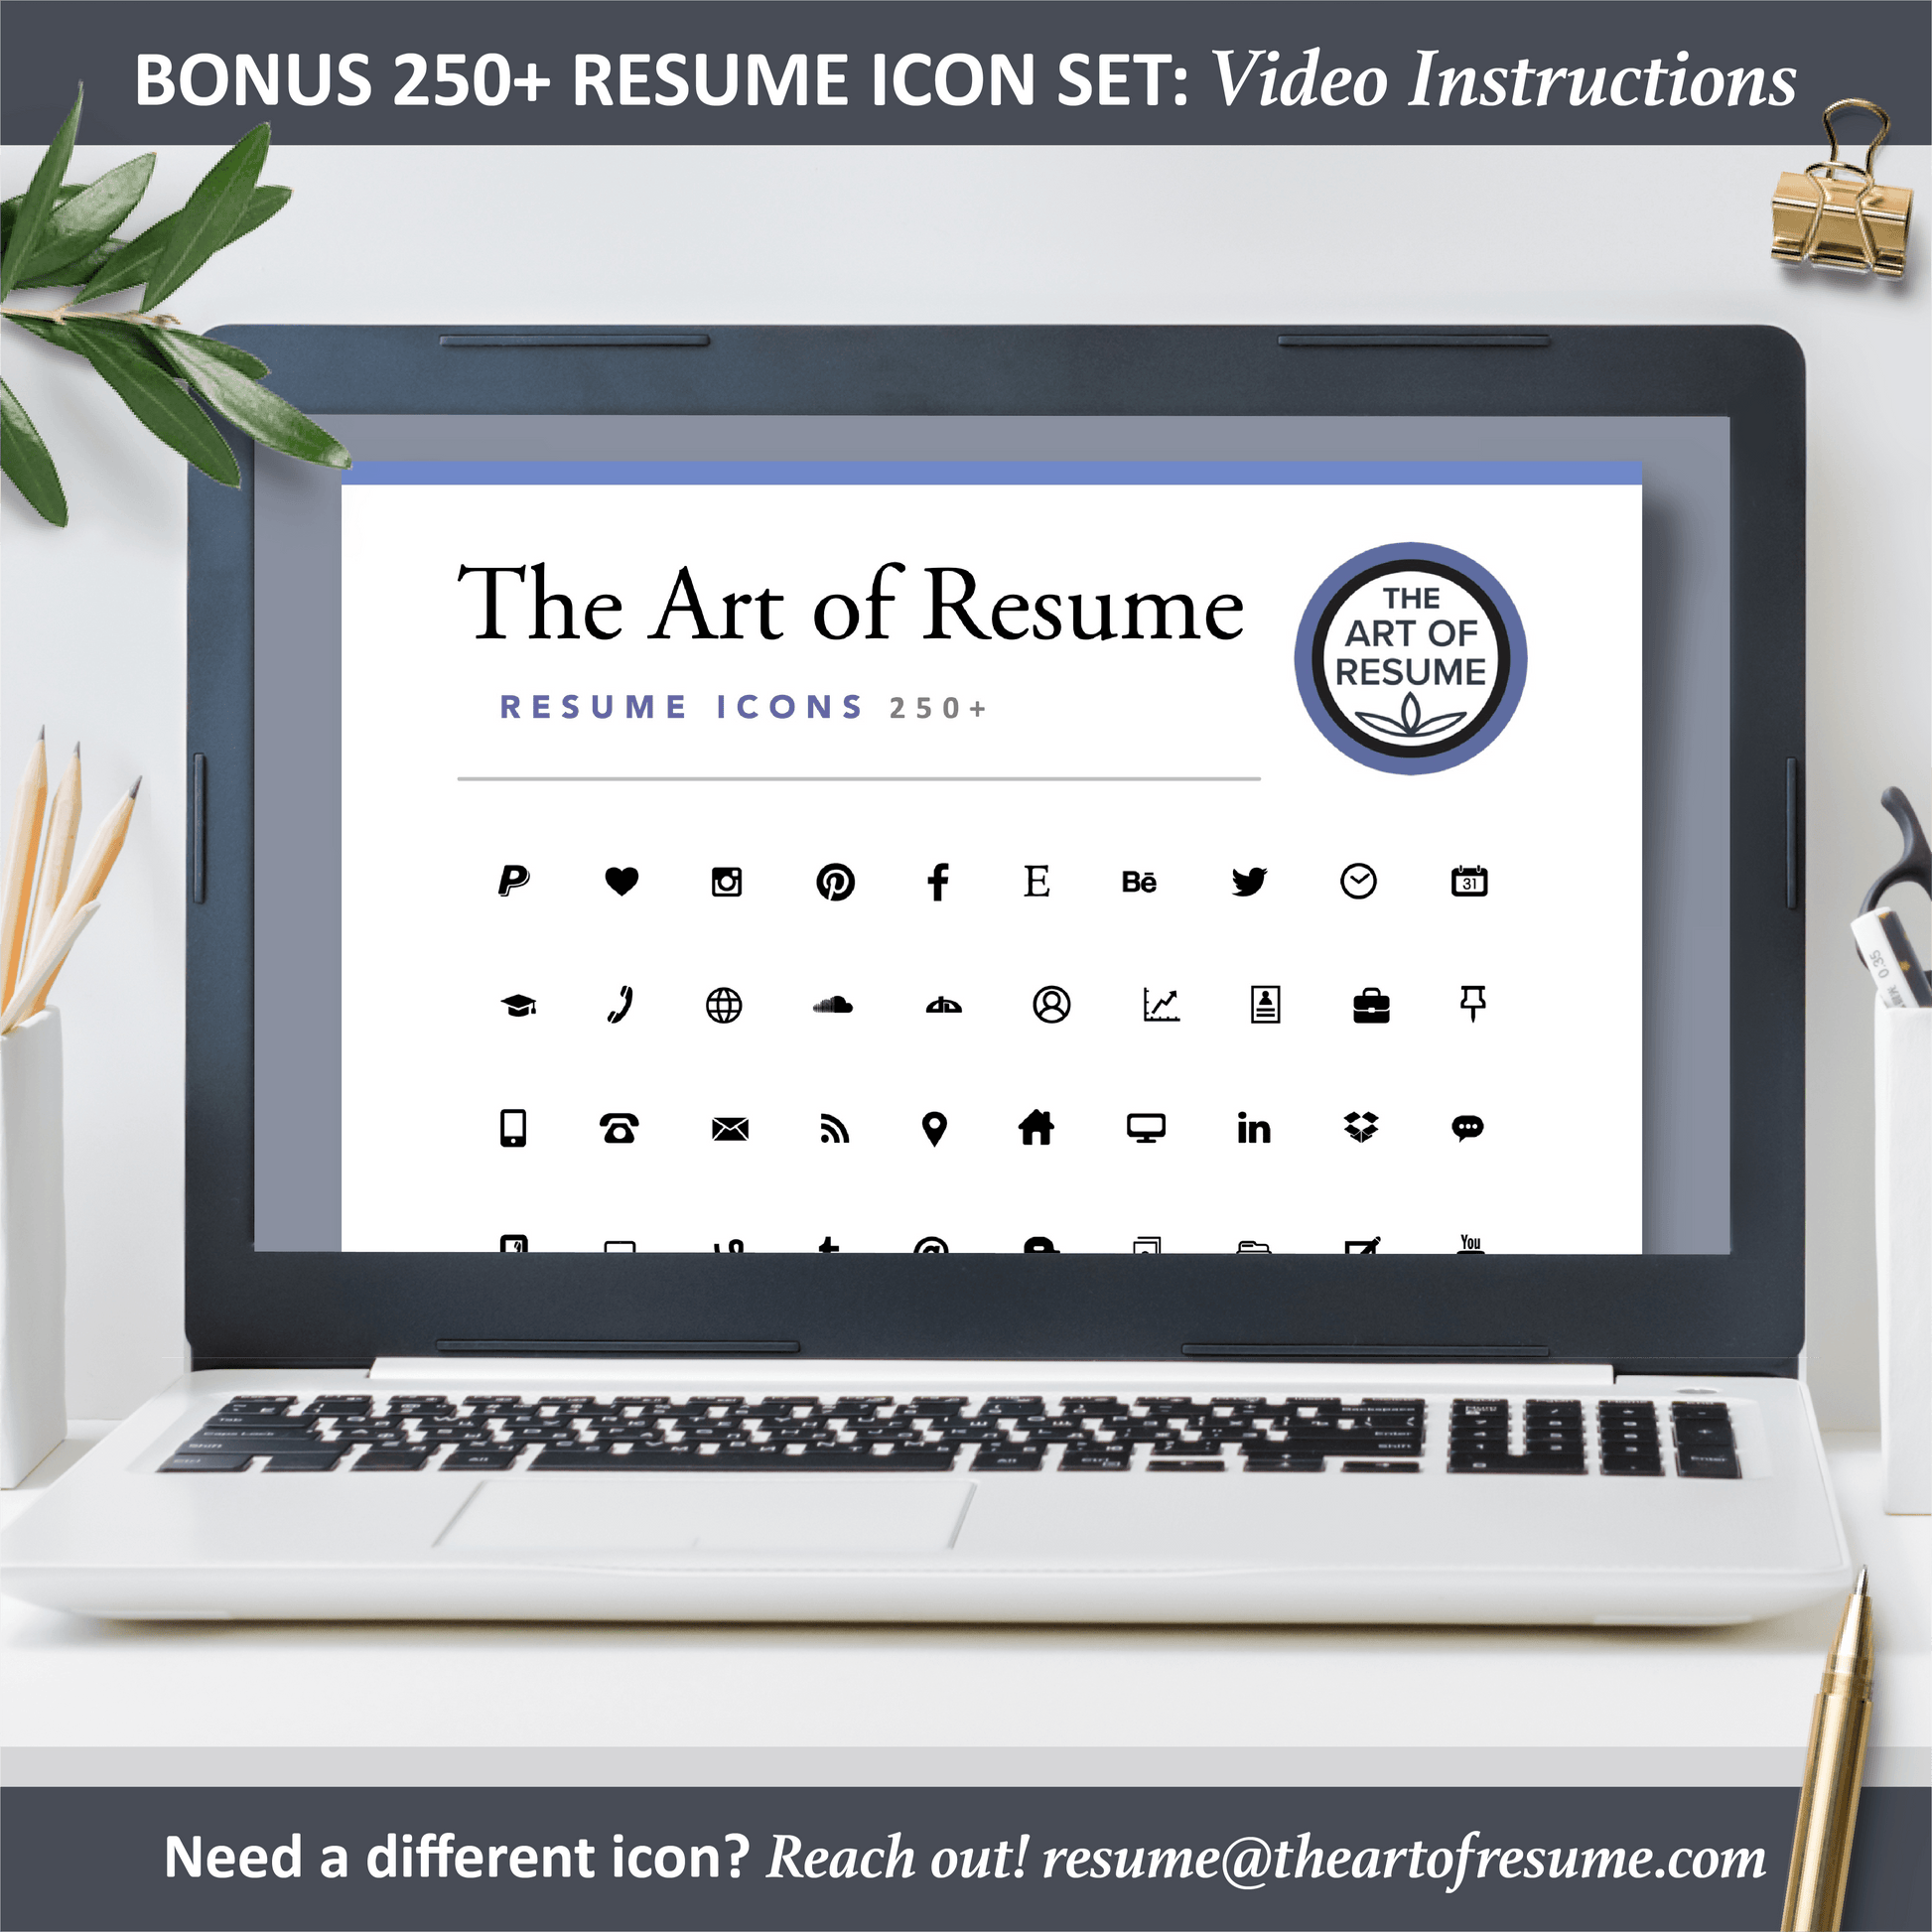 The Art of Resume Templates | Bonus 250+ Free Professional Resume CV Icons, Images PNG